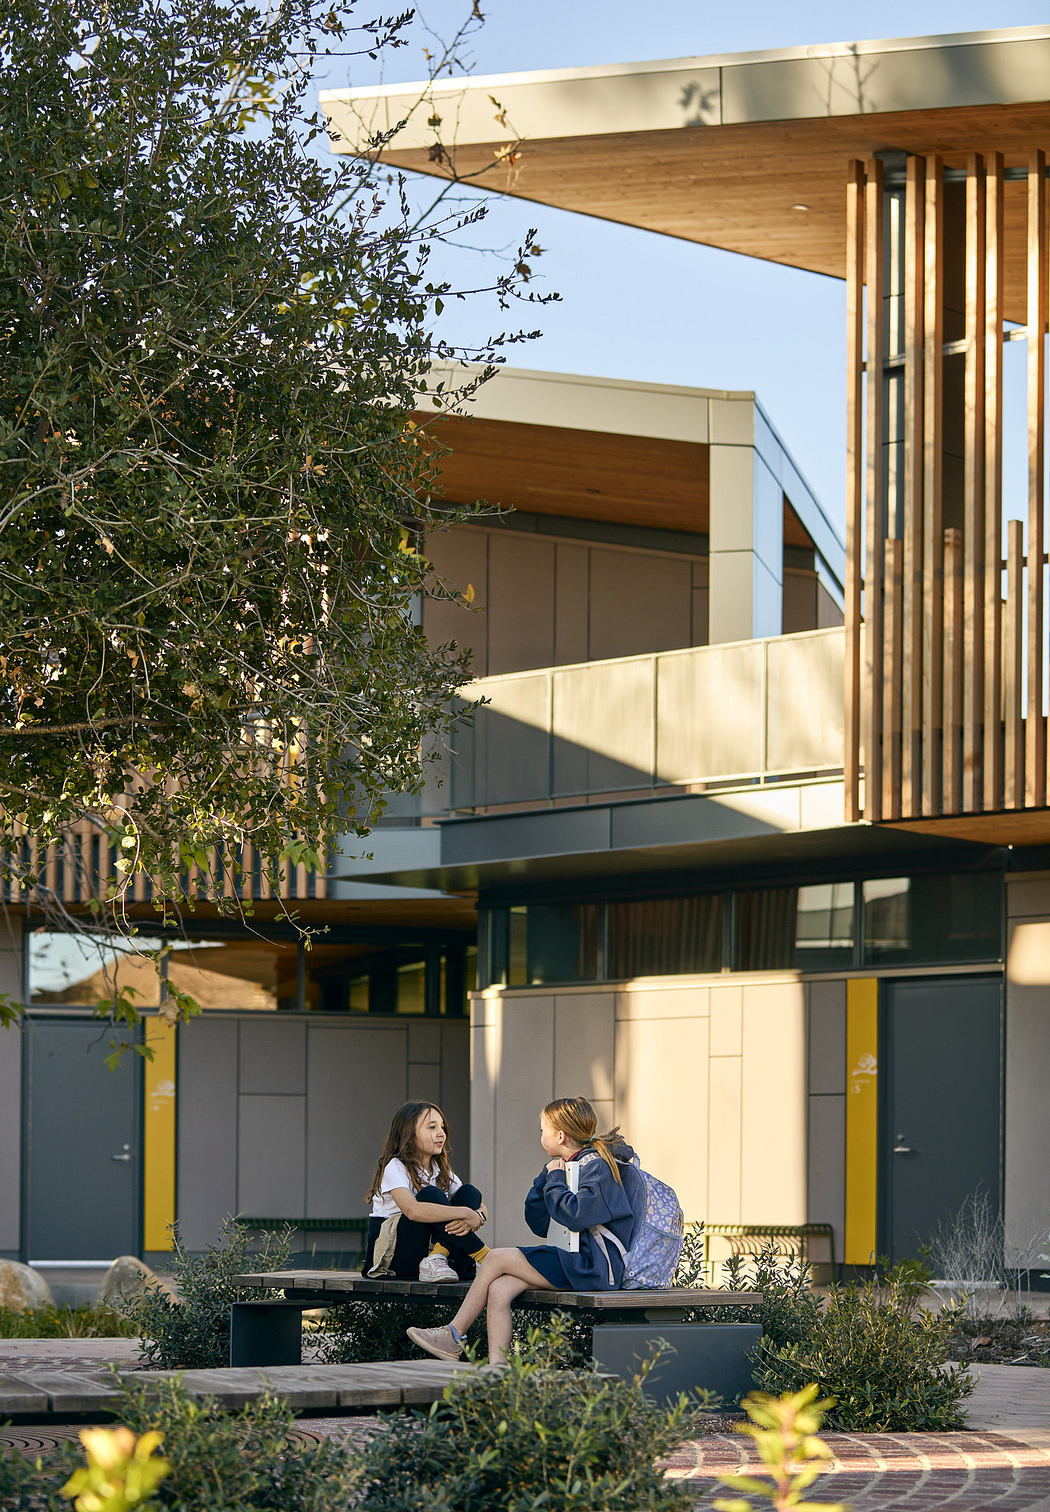 The image shows a modern, well-designed building with clean lines, wooden accents, and a covered outdoor seating area.